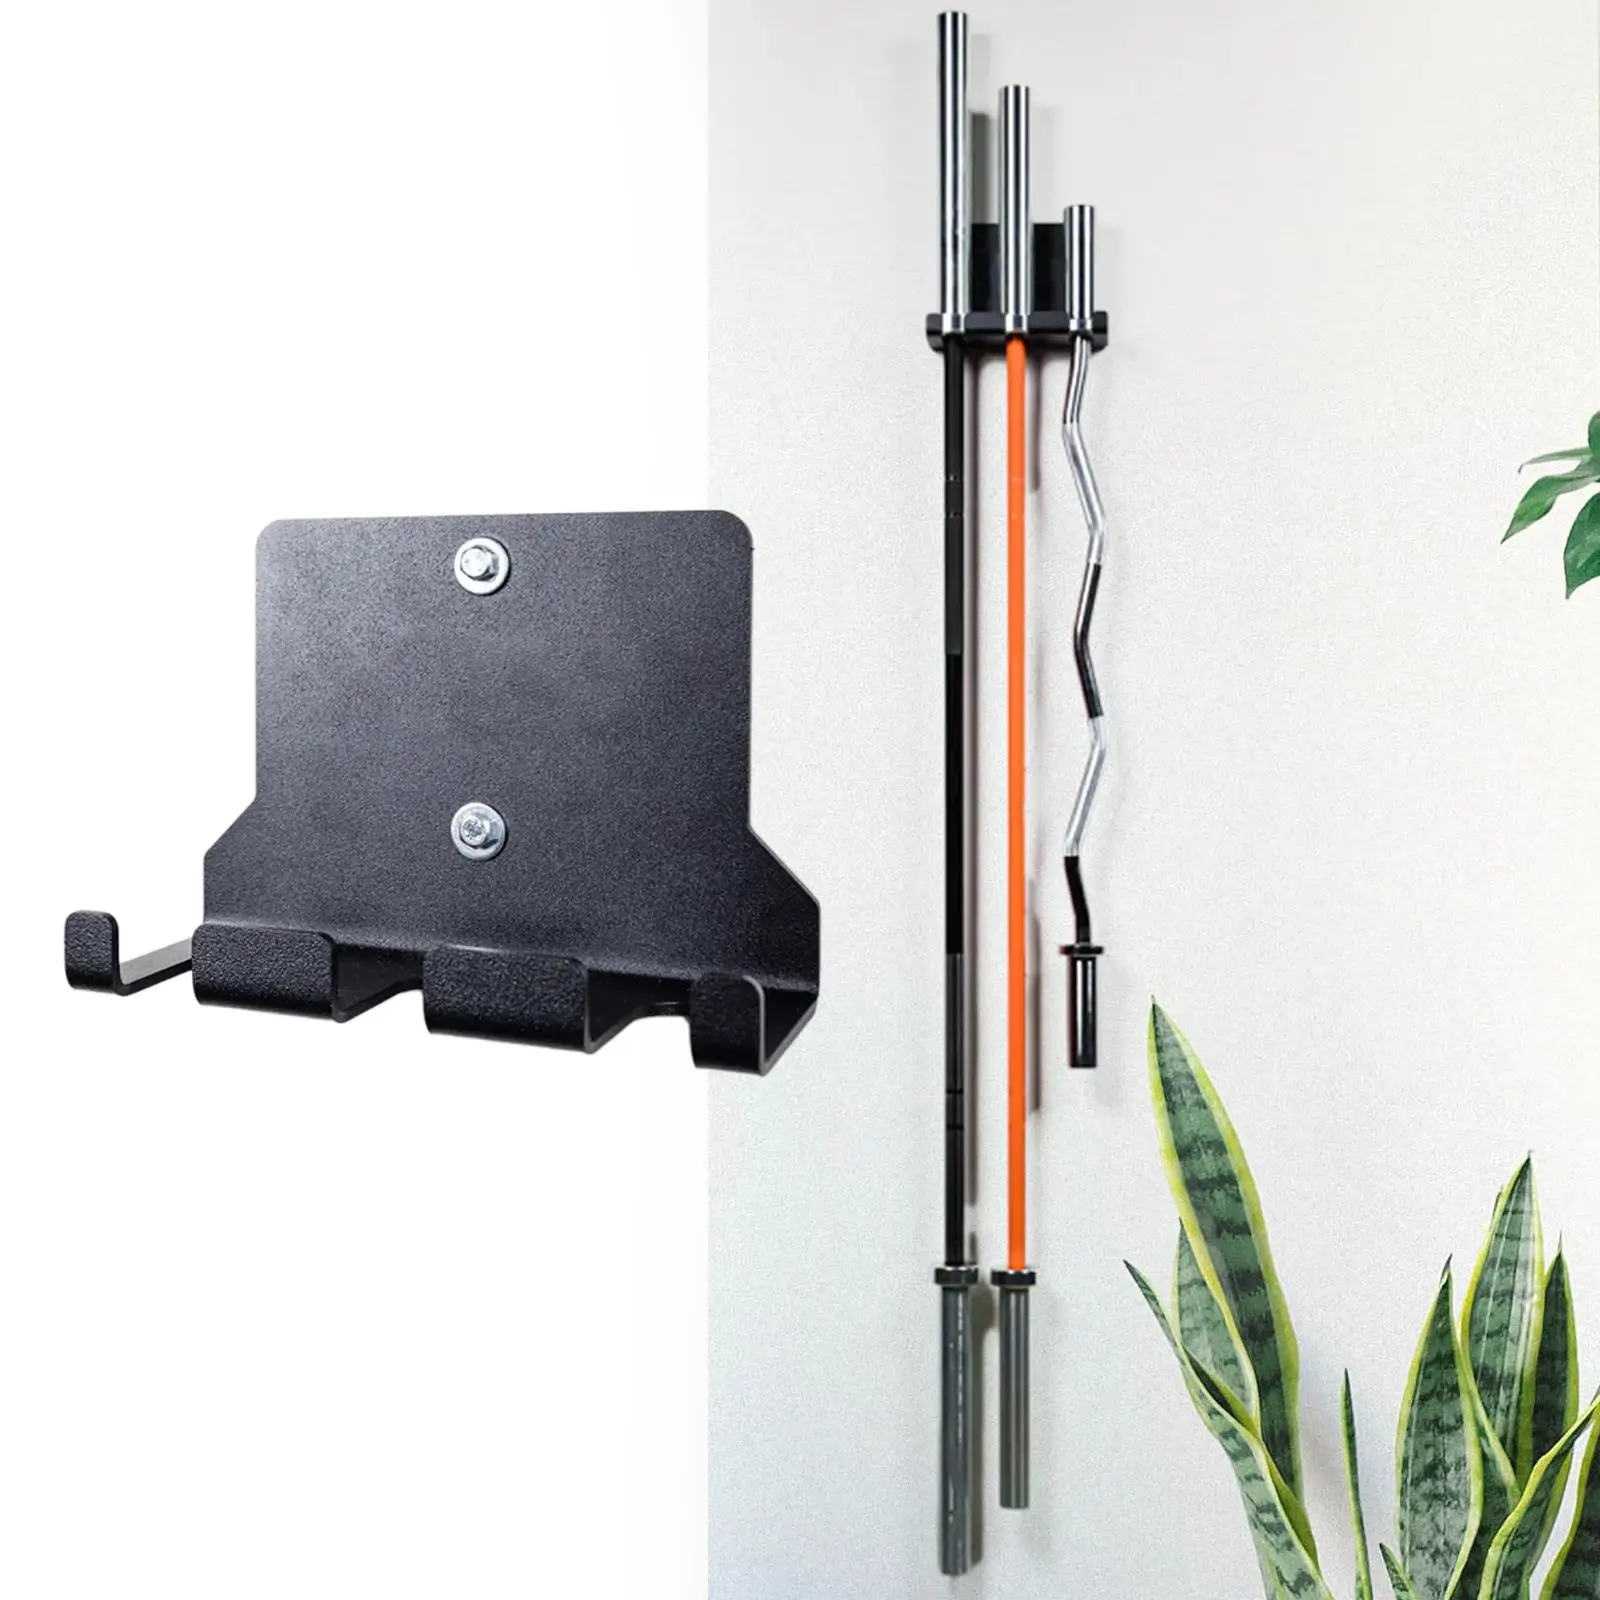 Barbell Storage Holder Rack Display Wall Mount Weight Bar Holder Space Saving Wall Hanger for Commercial Workout Gym Equipment